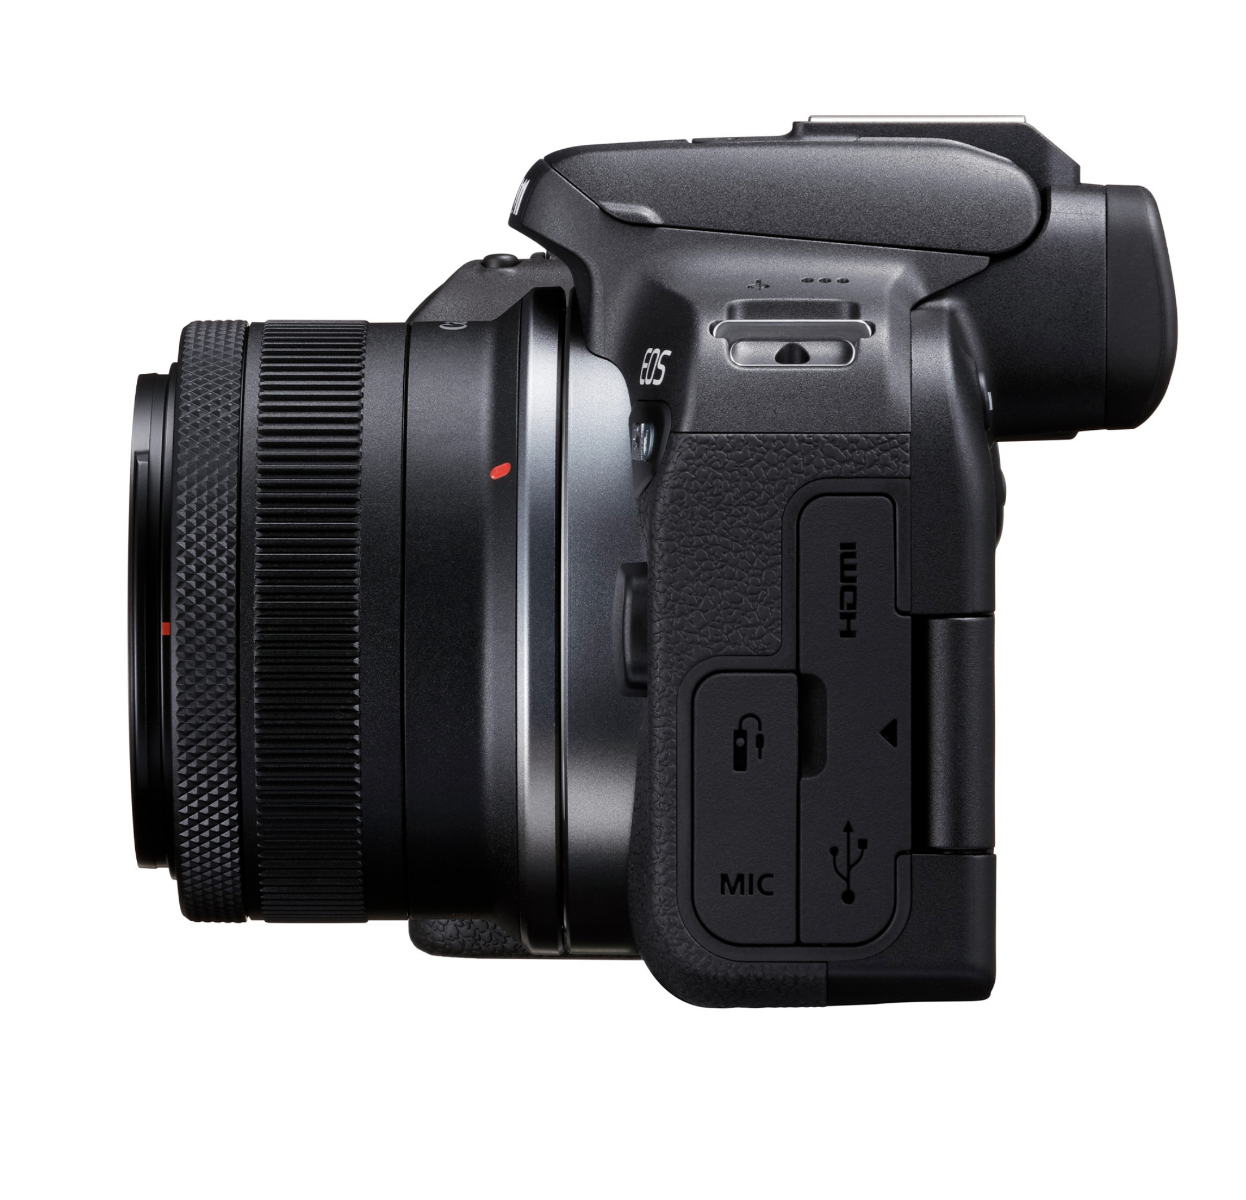 Canon EOS R10 Mirrorless Camera + RF-S 18-45mm lens Kit - Product photo 3 - Side view of the camera with the lens attached and input / output ports visible